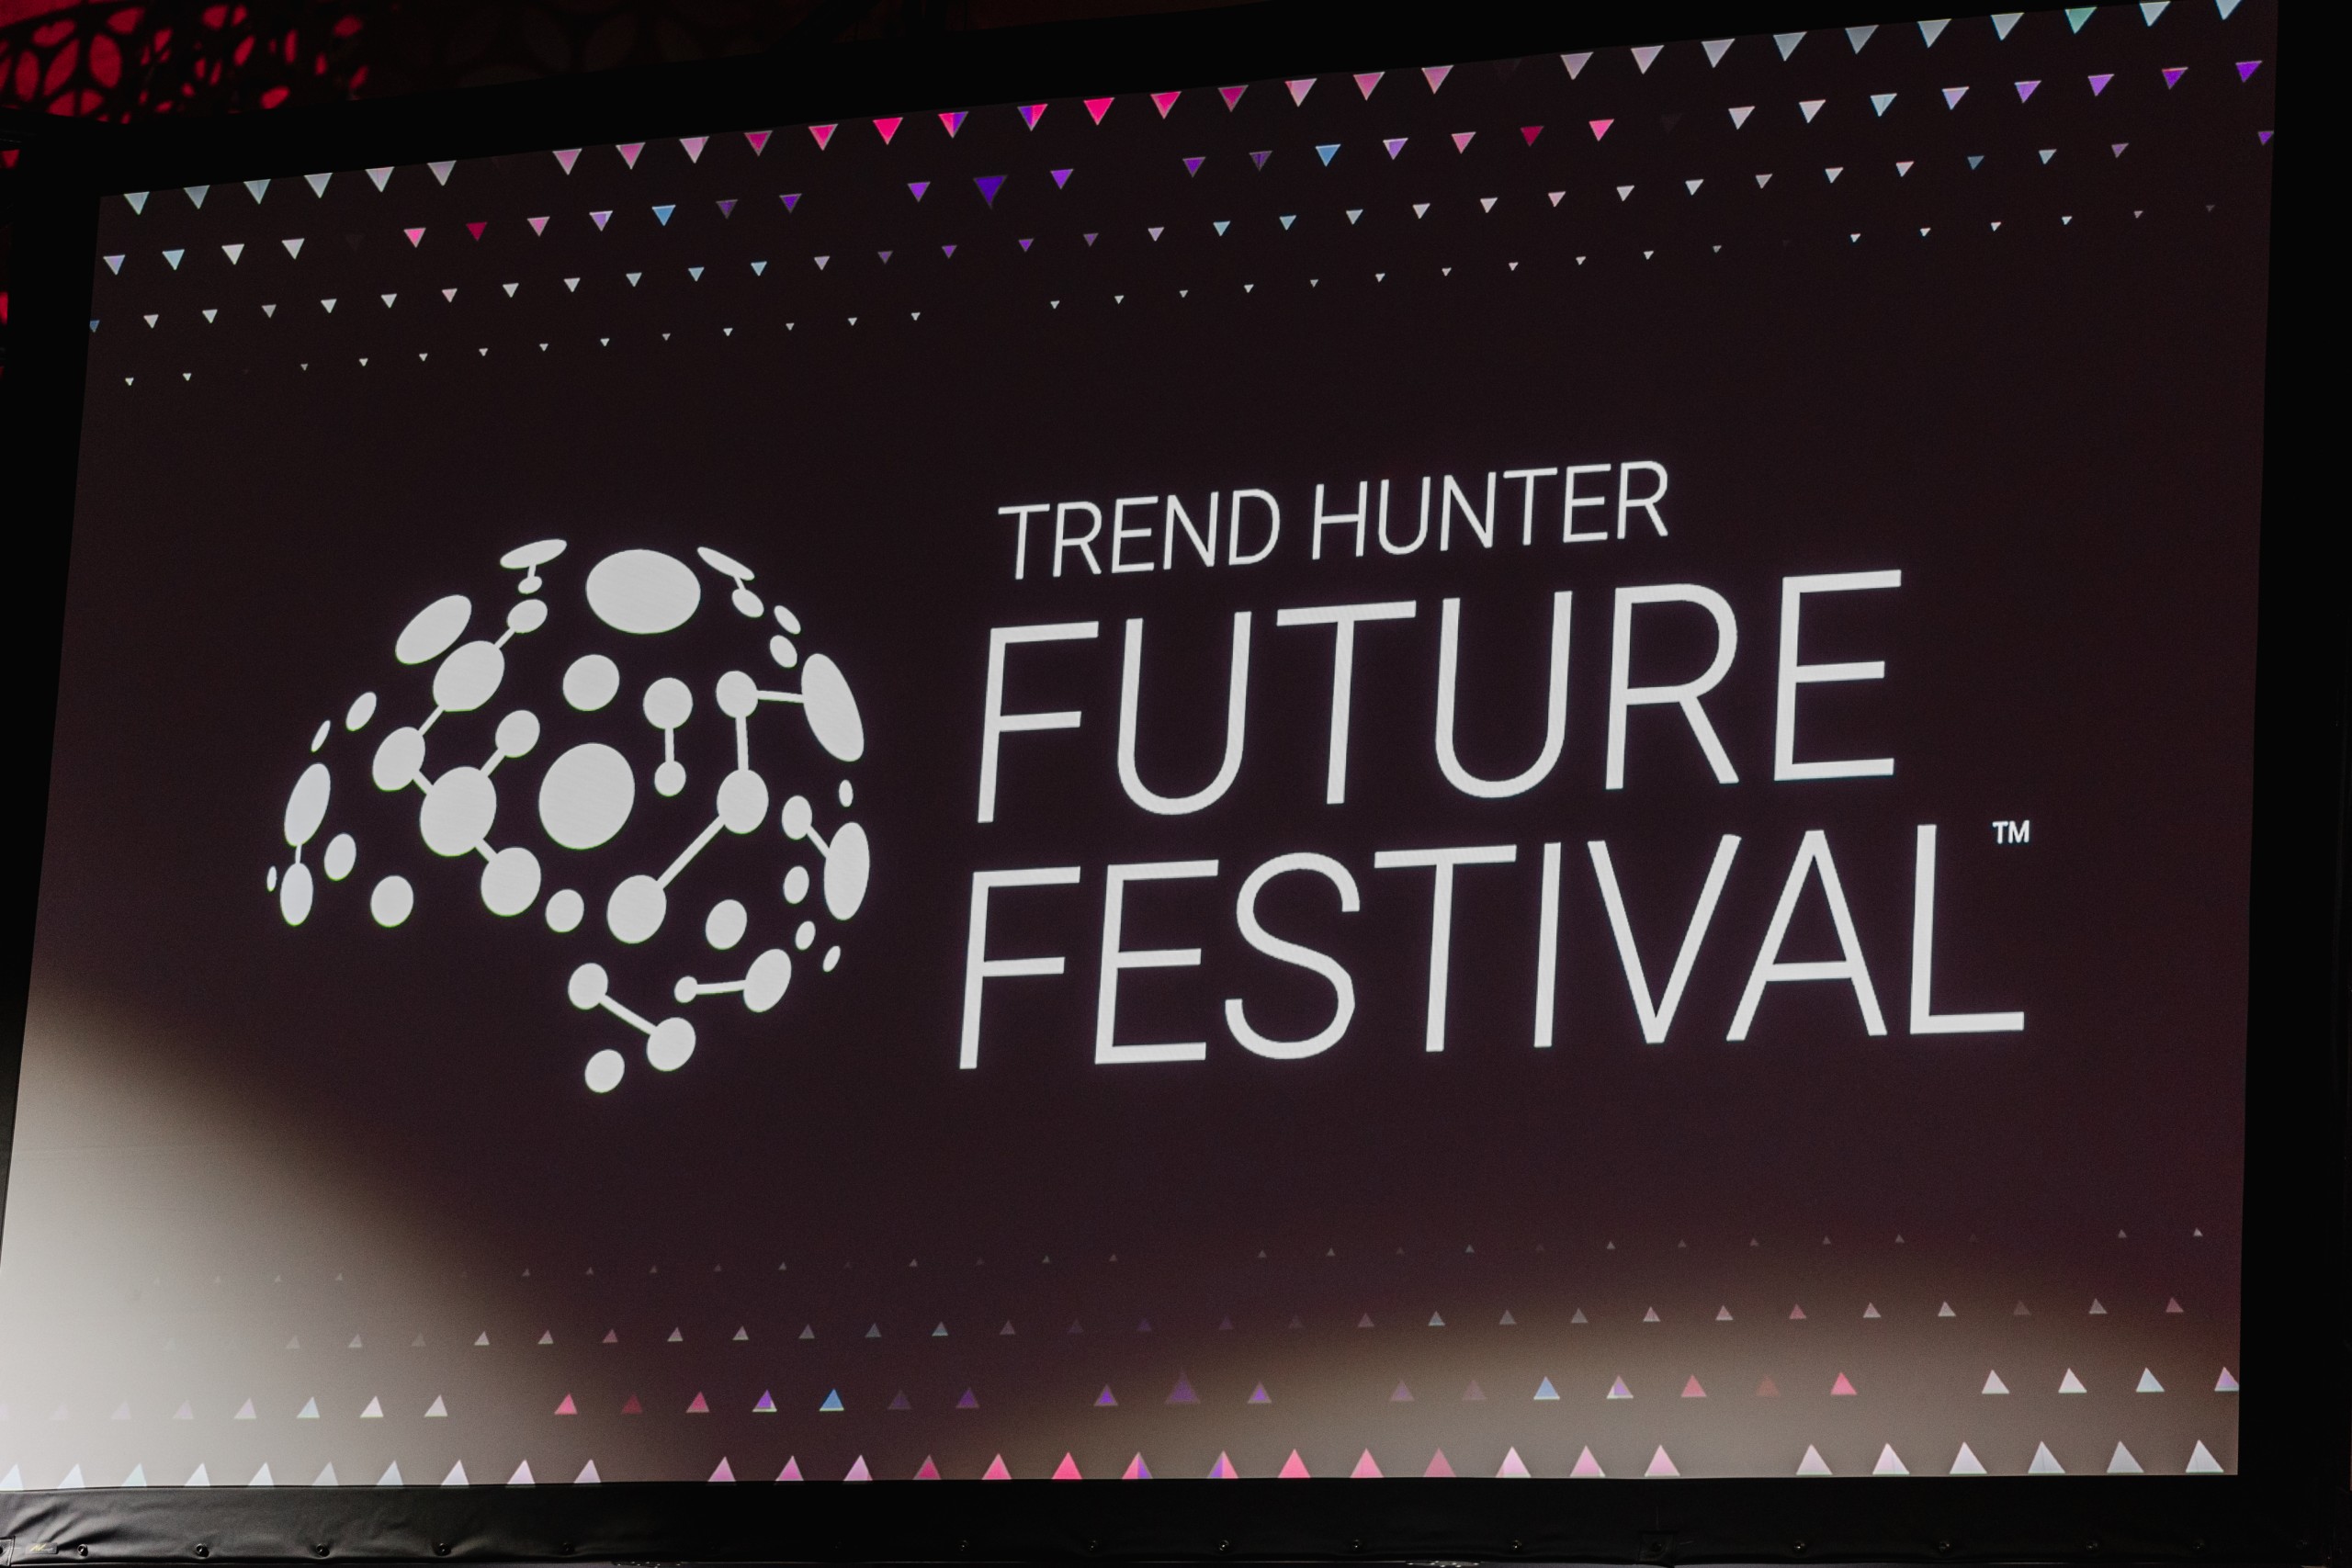 Event photography at the Trend Hunter Future Festival.